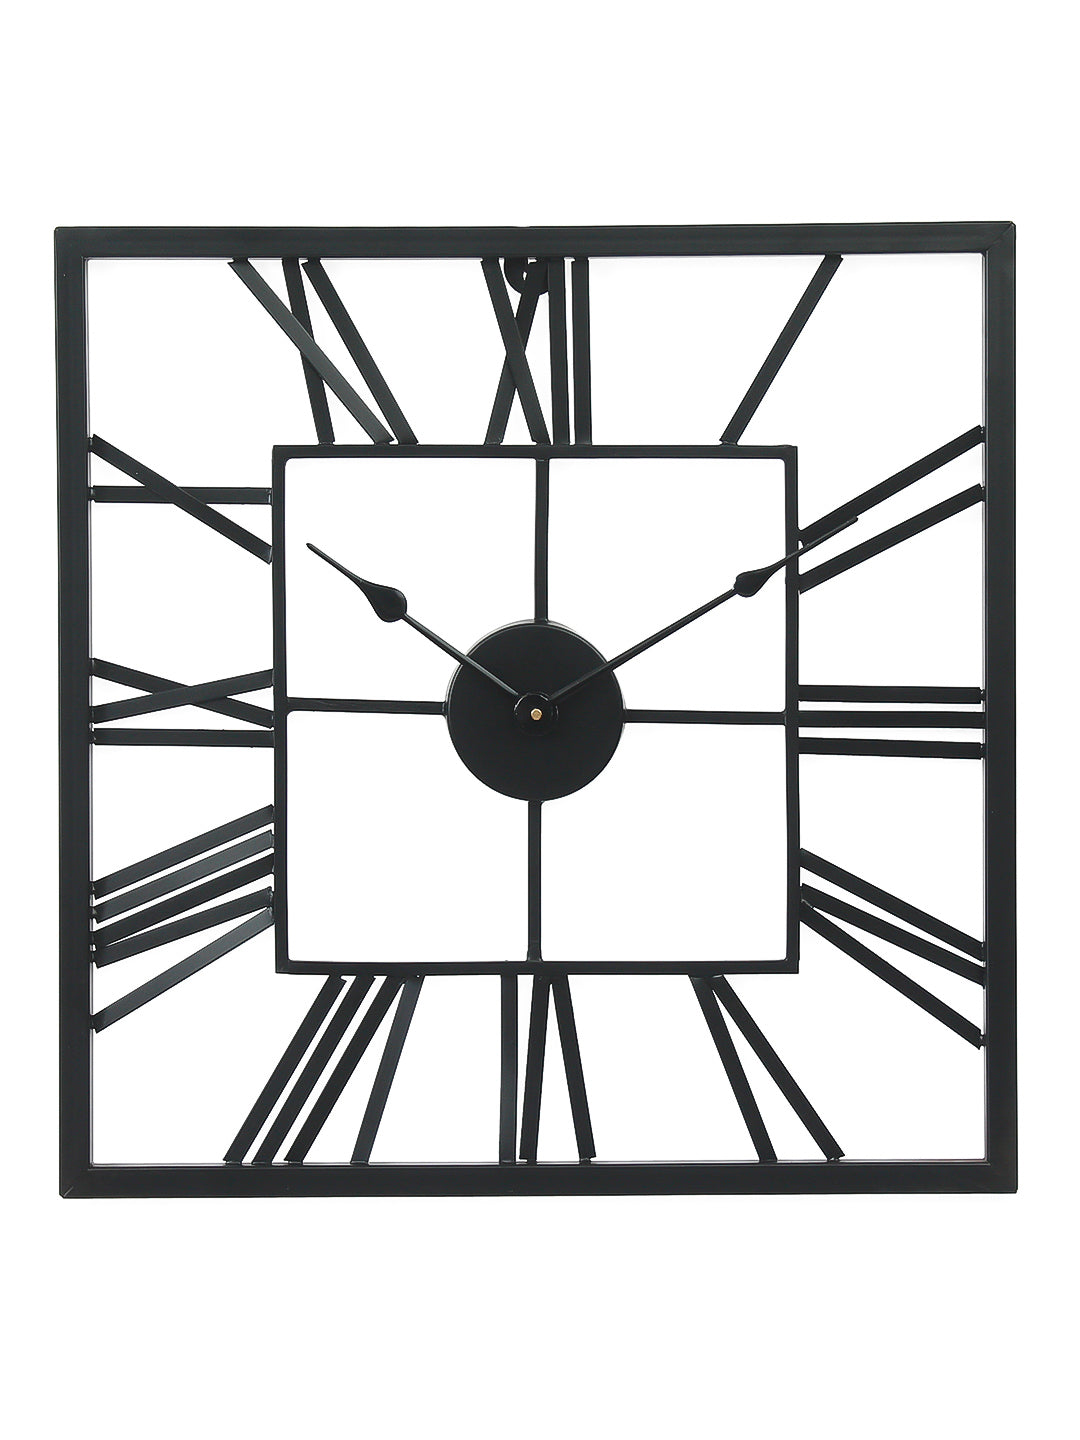 Black Iron Square Handcrafted Analog Roman Numeral Wall Clock Without Glass